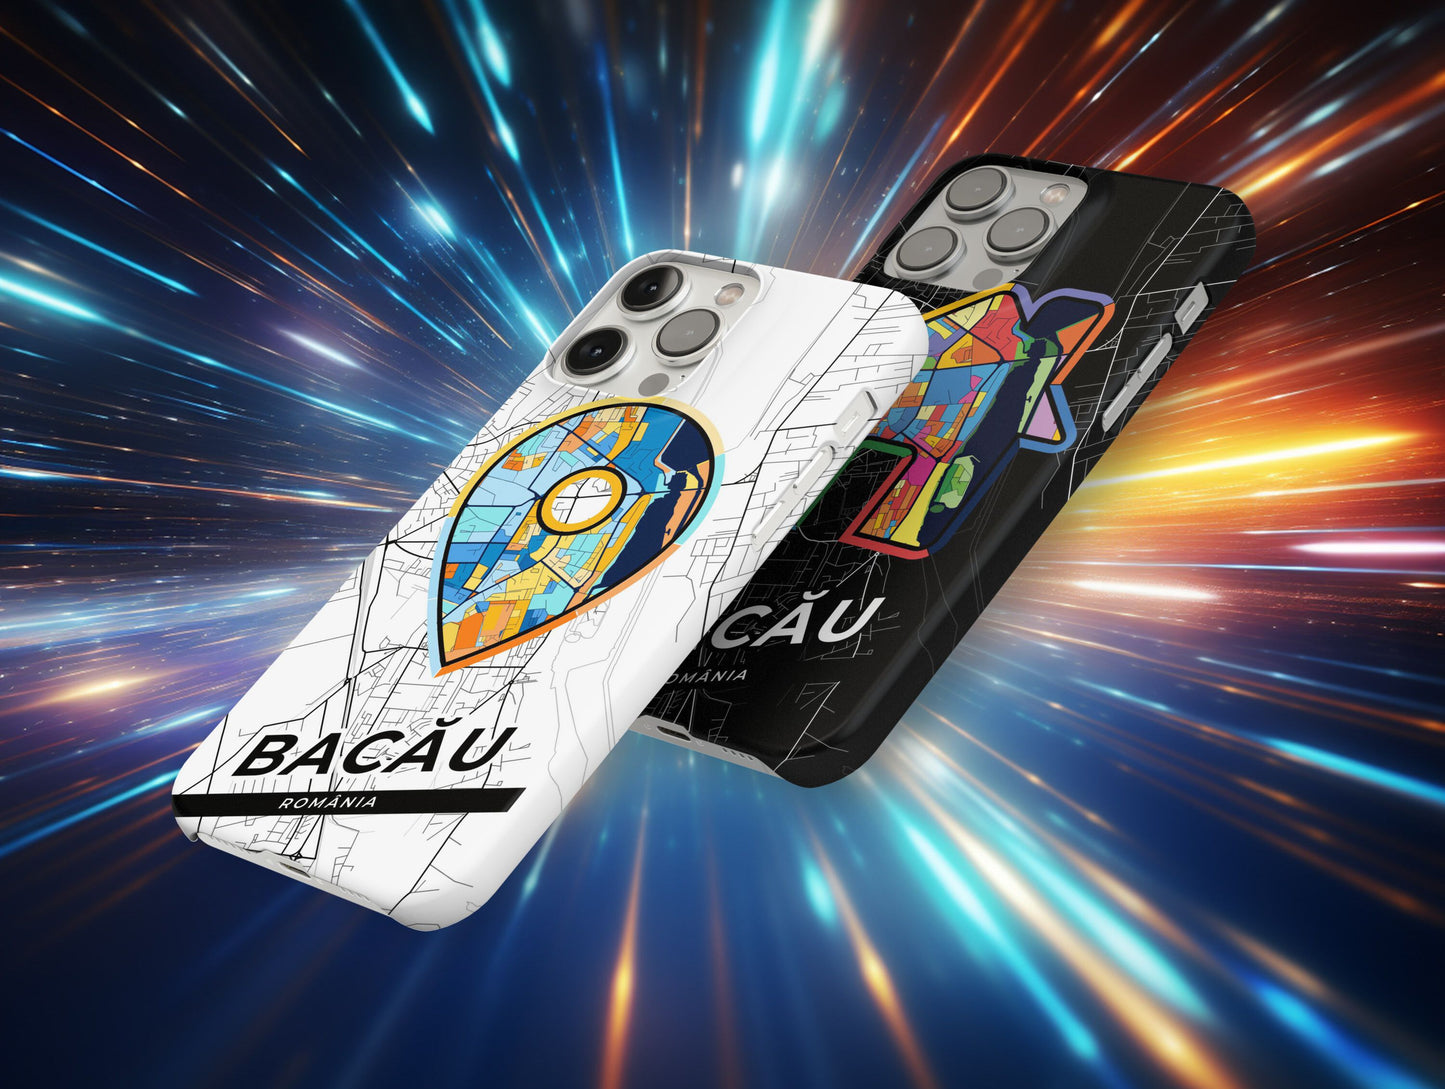 Bacău Romania slim phone case with colorful icon. Birthday, wedding or housewarming gift. Couple match cases.